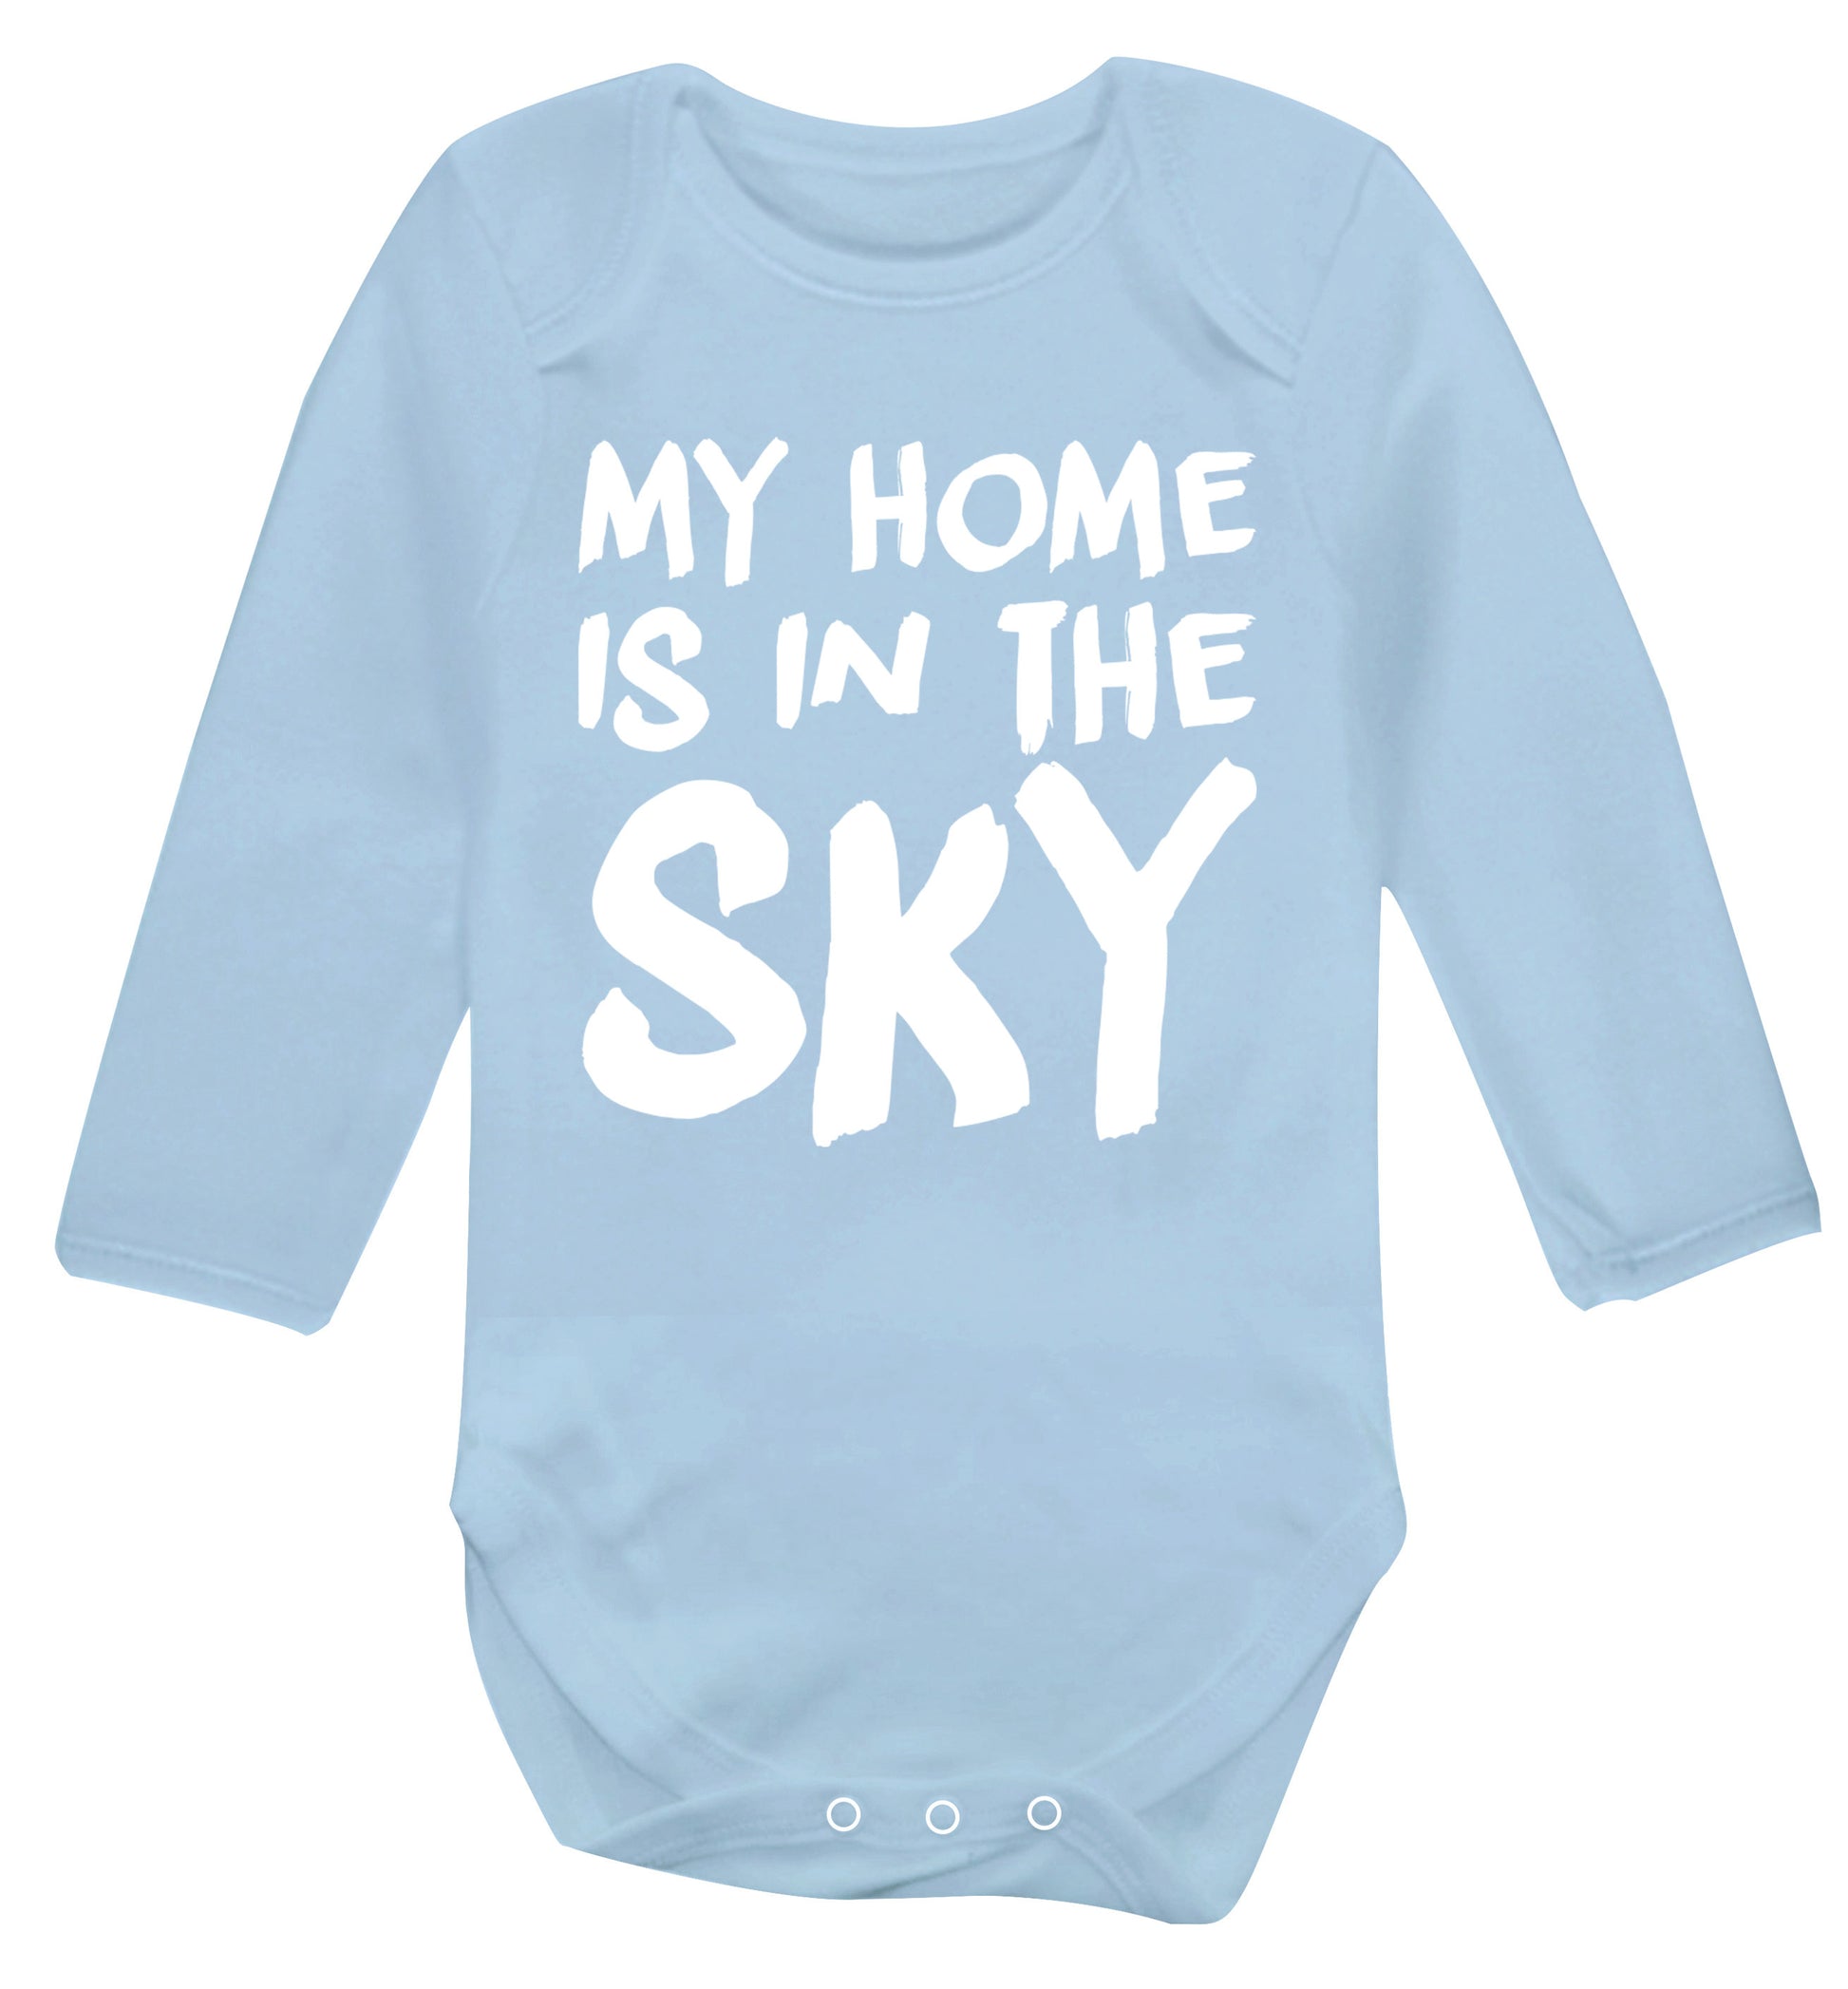 My home is in the sky Baby Vest long sleeved pale blue 6-12 months